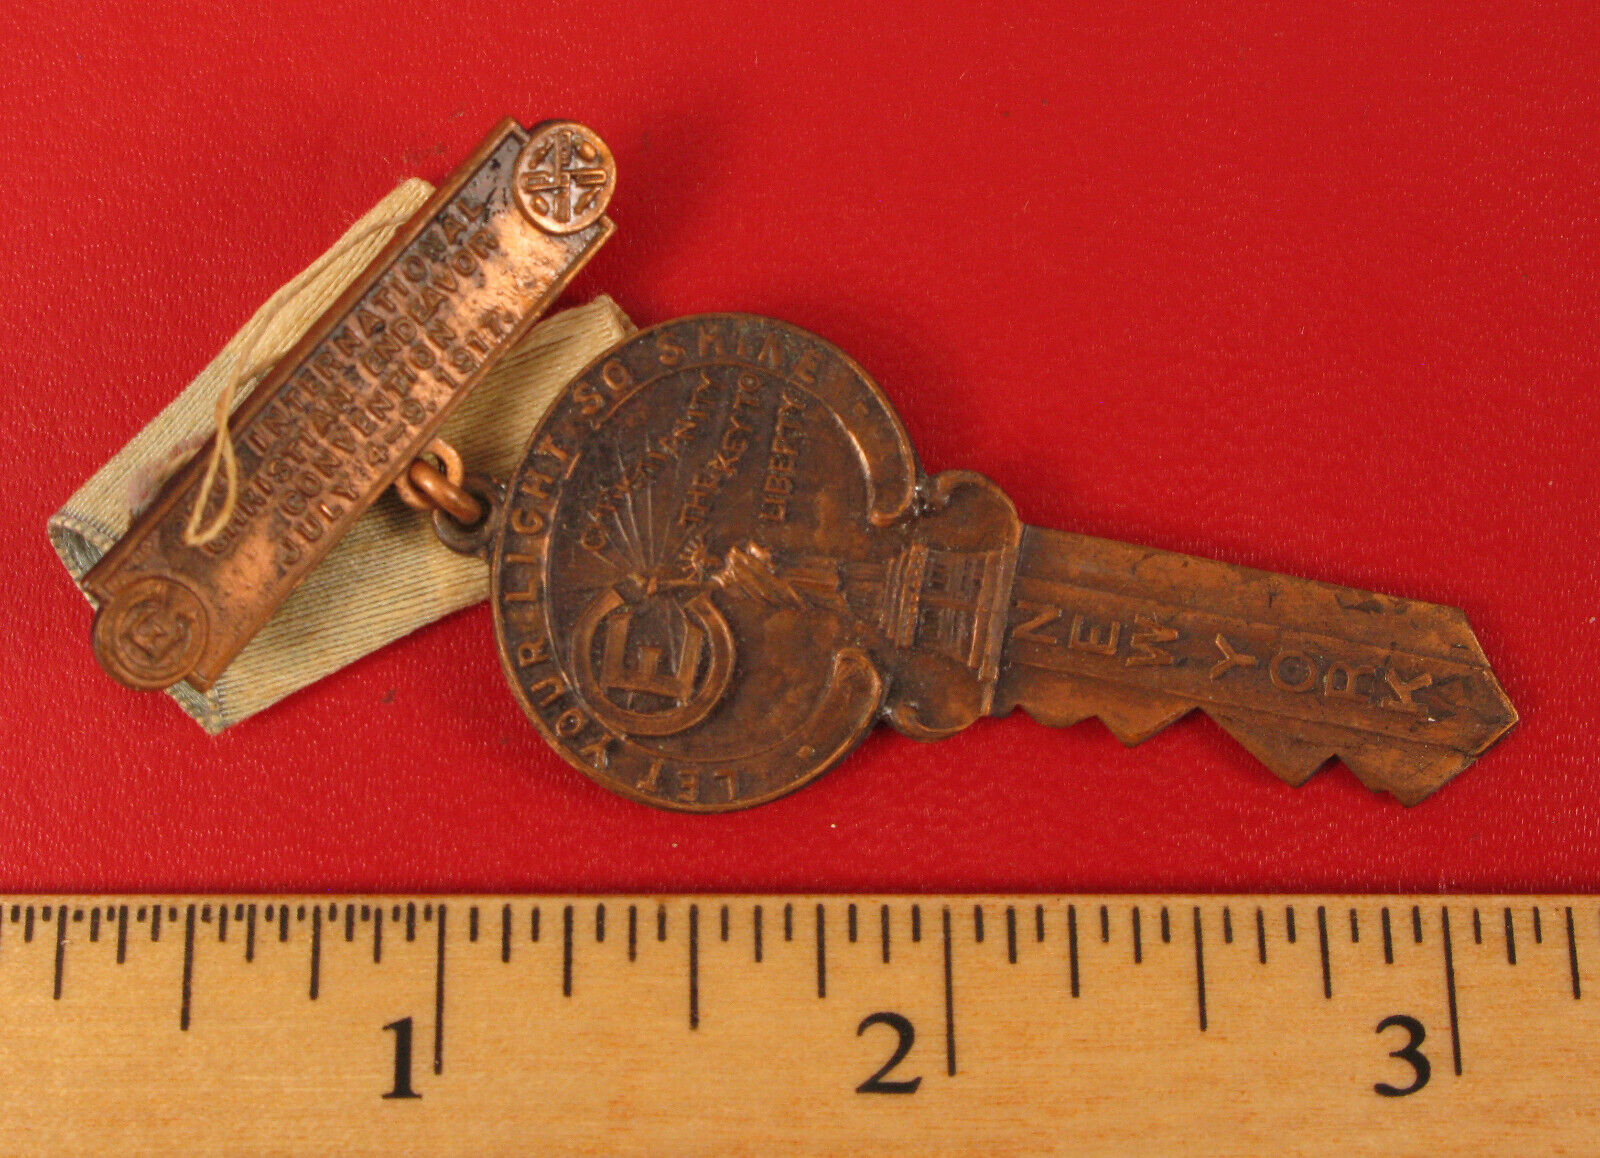 VINTAGE 1917 CHRISTIANITY ENDEAVOR CONVENTION STATUE OF LIBERTY KEY NY MEDAL 